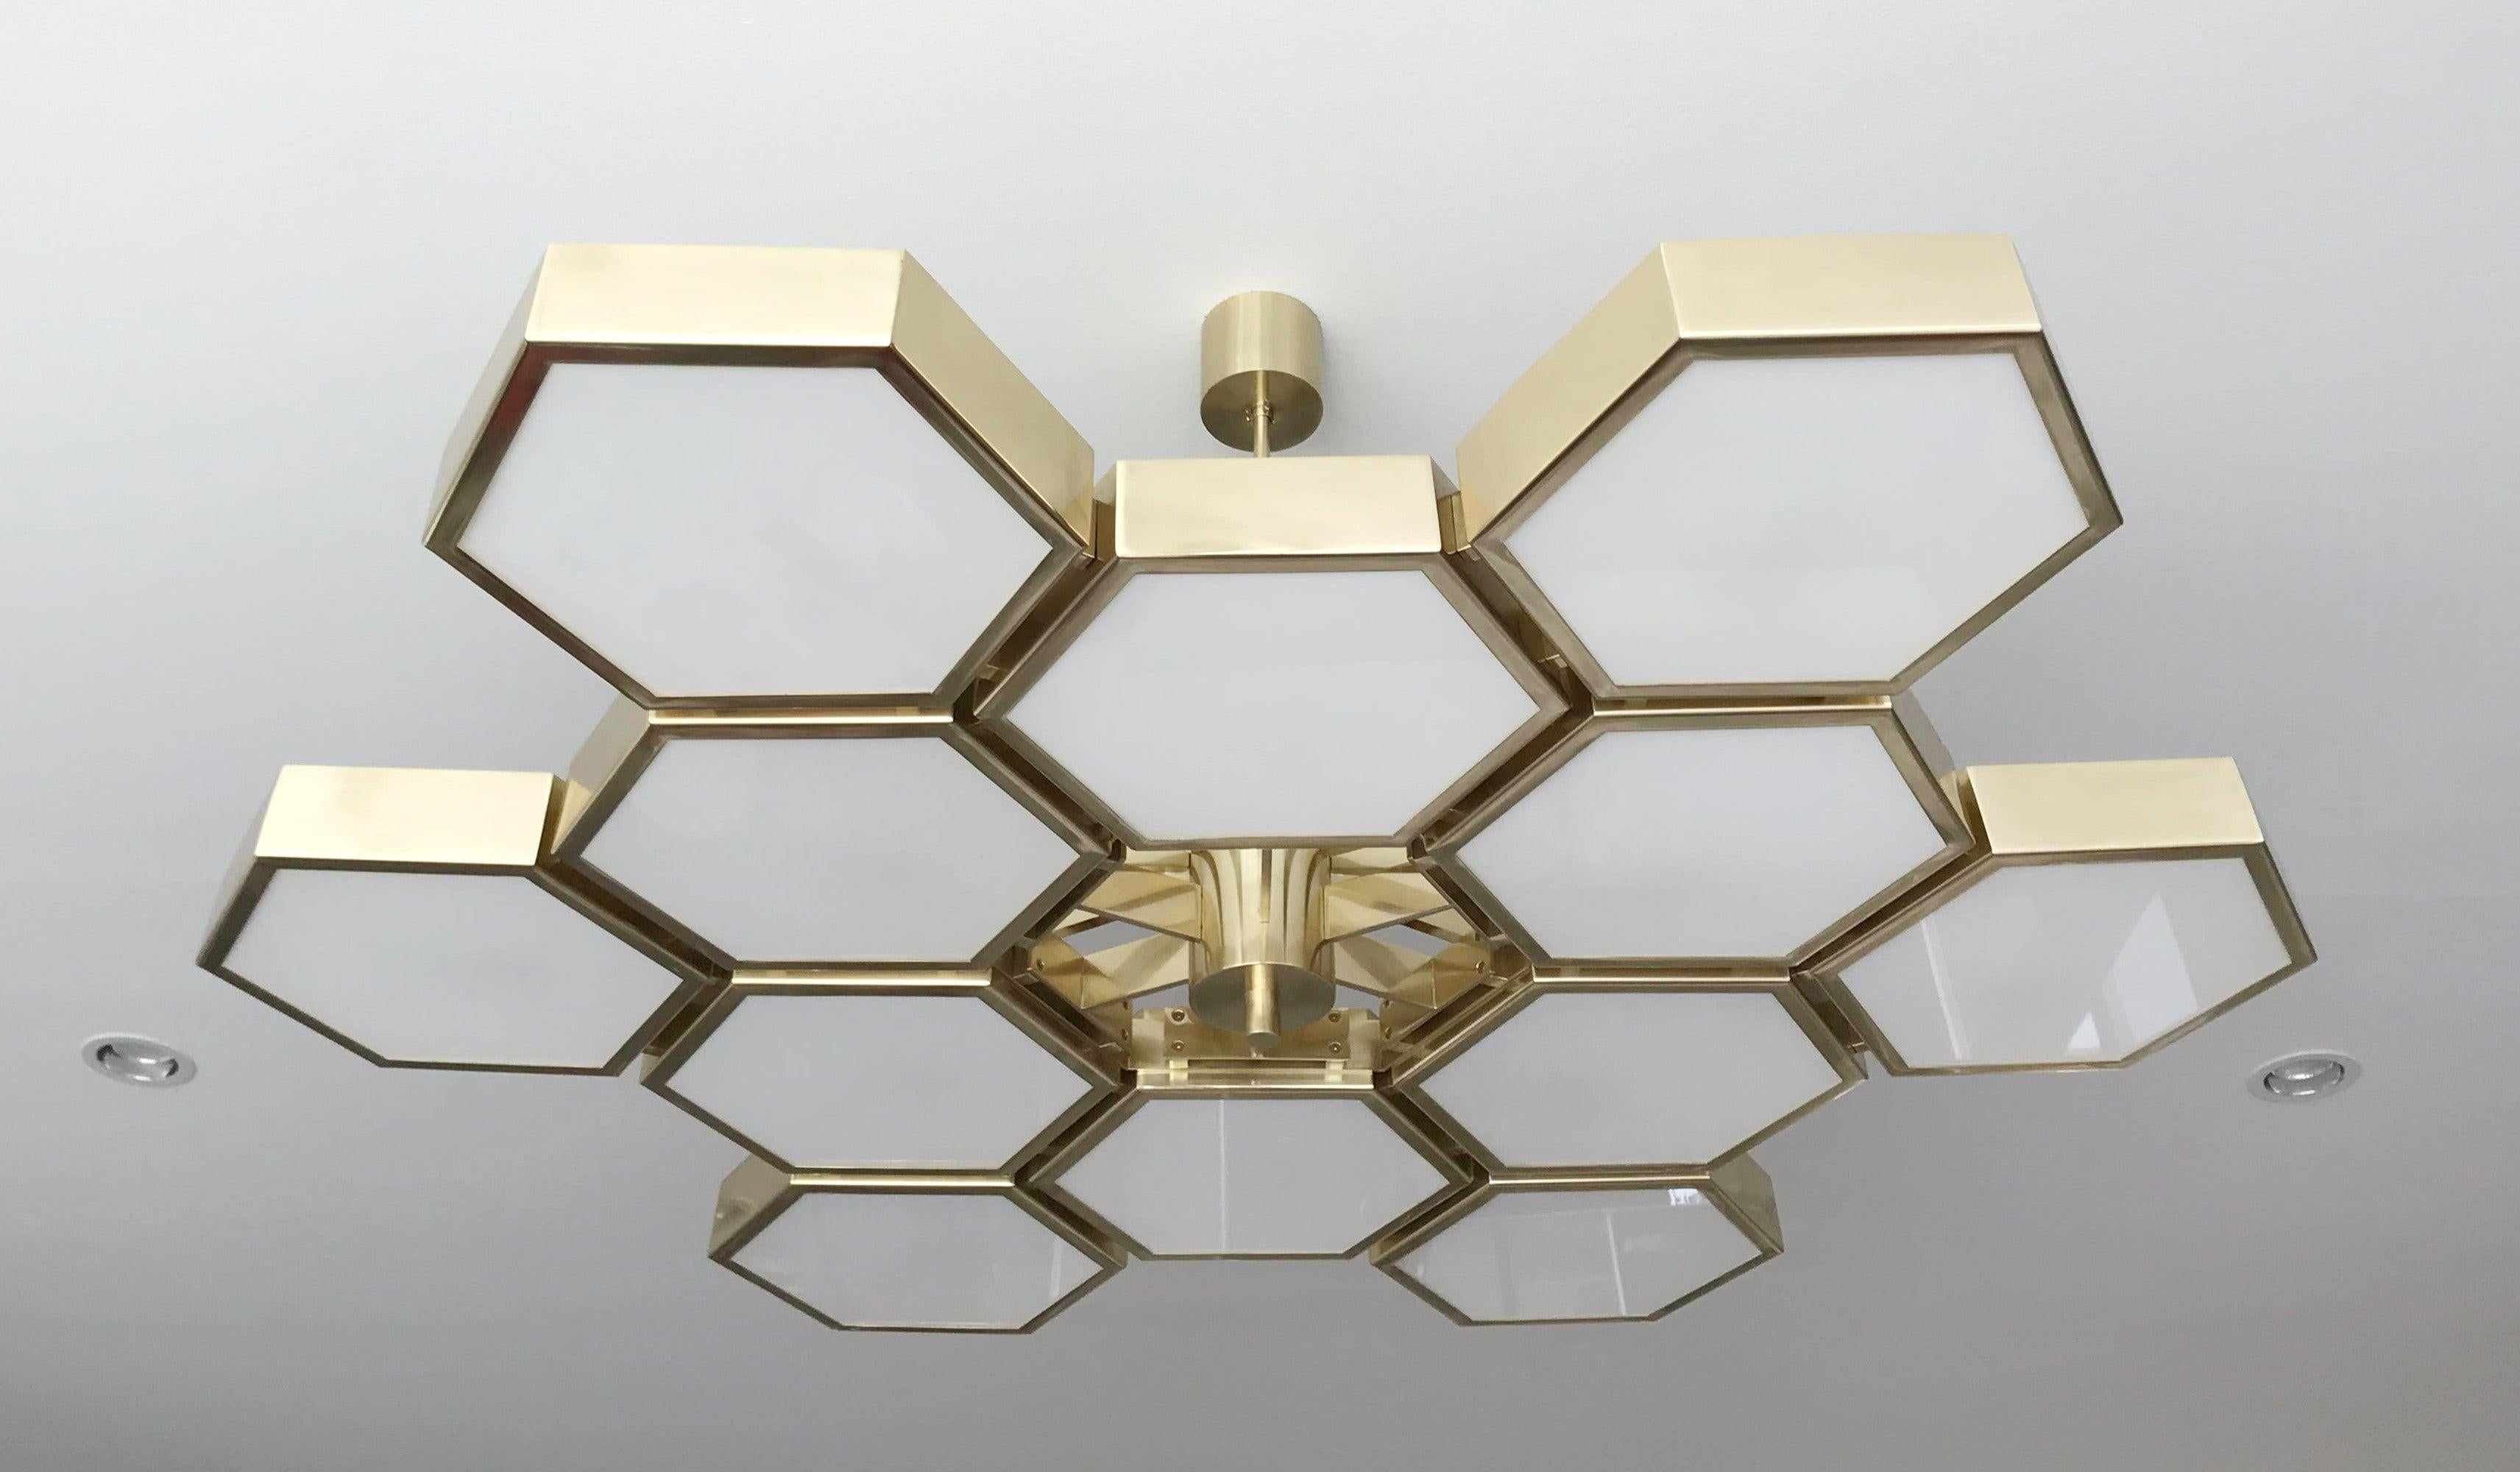 Impressive Italian chandelier with 12 hexagonal glossy white glass diffusers, mounted on thick hexagonal brass cells in natural lacquered finish, designed by Fabio Bergomi for Fabio Ltd, made in Italy
12 lights / E12 or E14 type / max 40W